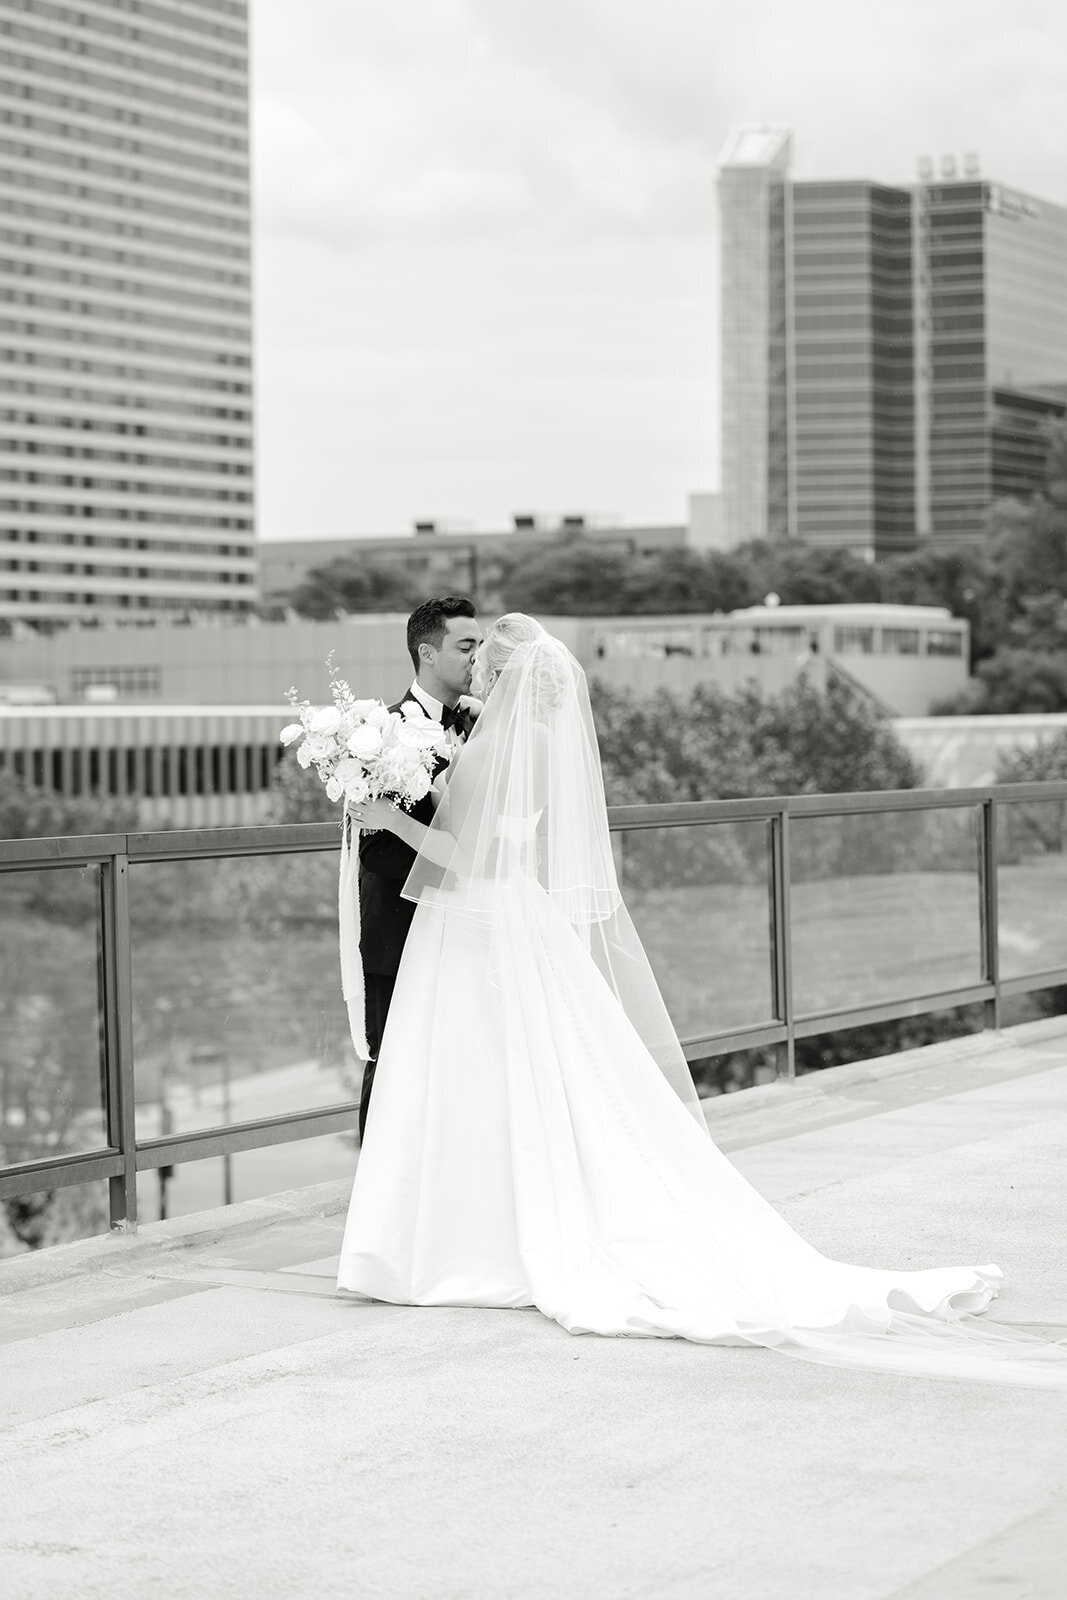 The Parks - The Gallery Event Space - Kansas City Wedding - Kansas City Wedding Photography - Nick and Lexie Photo Film-423